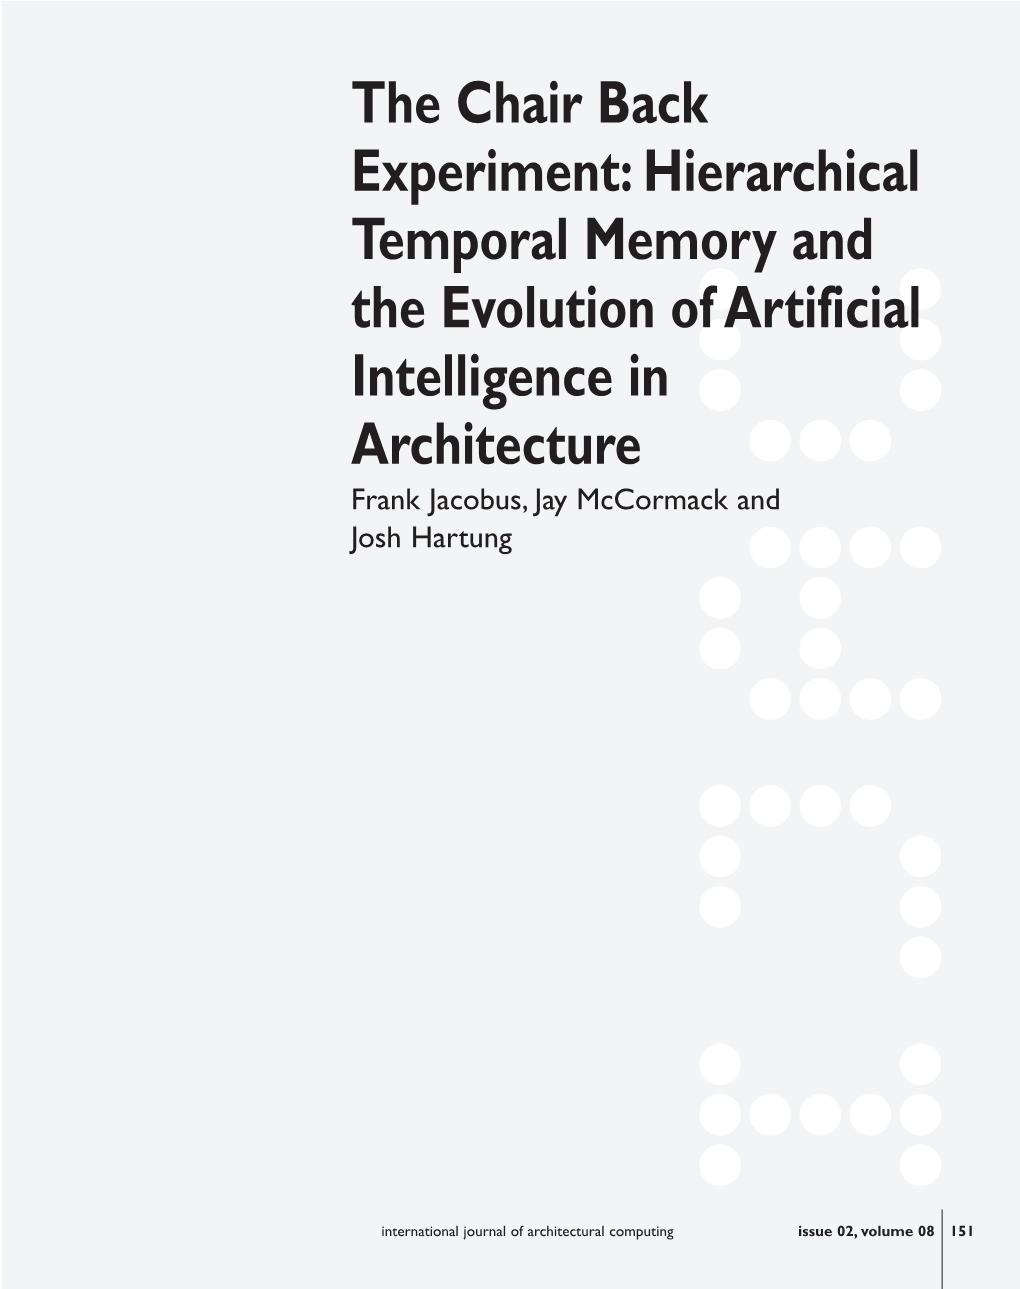 Hierarchical Temporal Memory and the Evolution of Artificial Intelligence in Architecture Frank Jacobus, Jay Mccormack and Josh Hartung